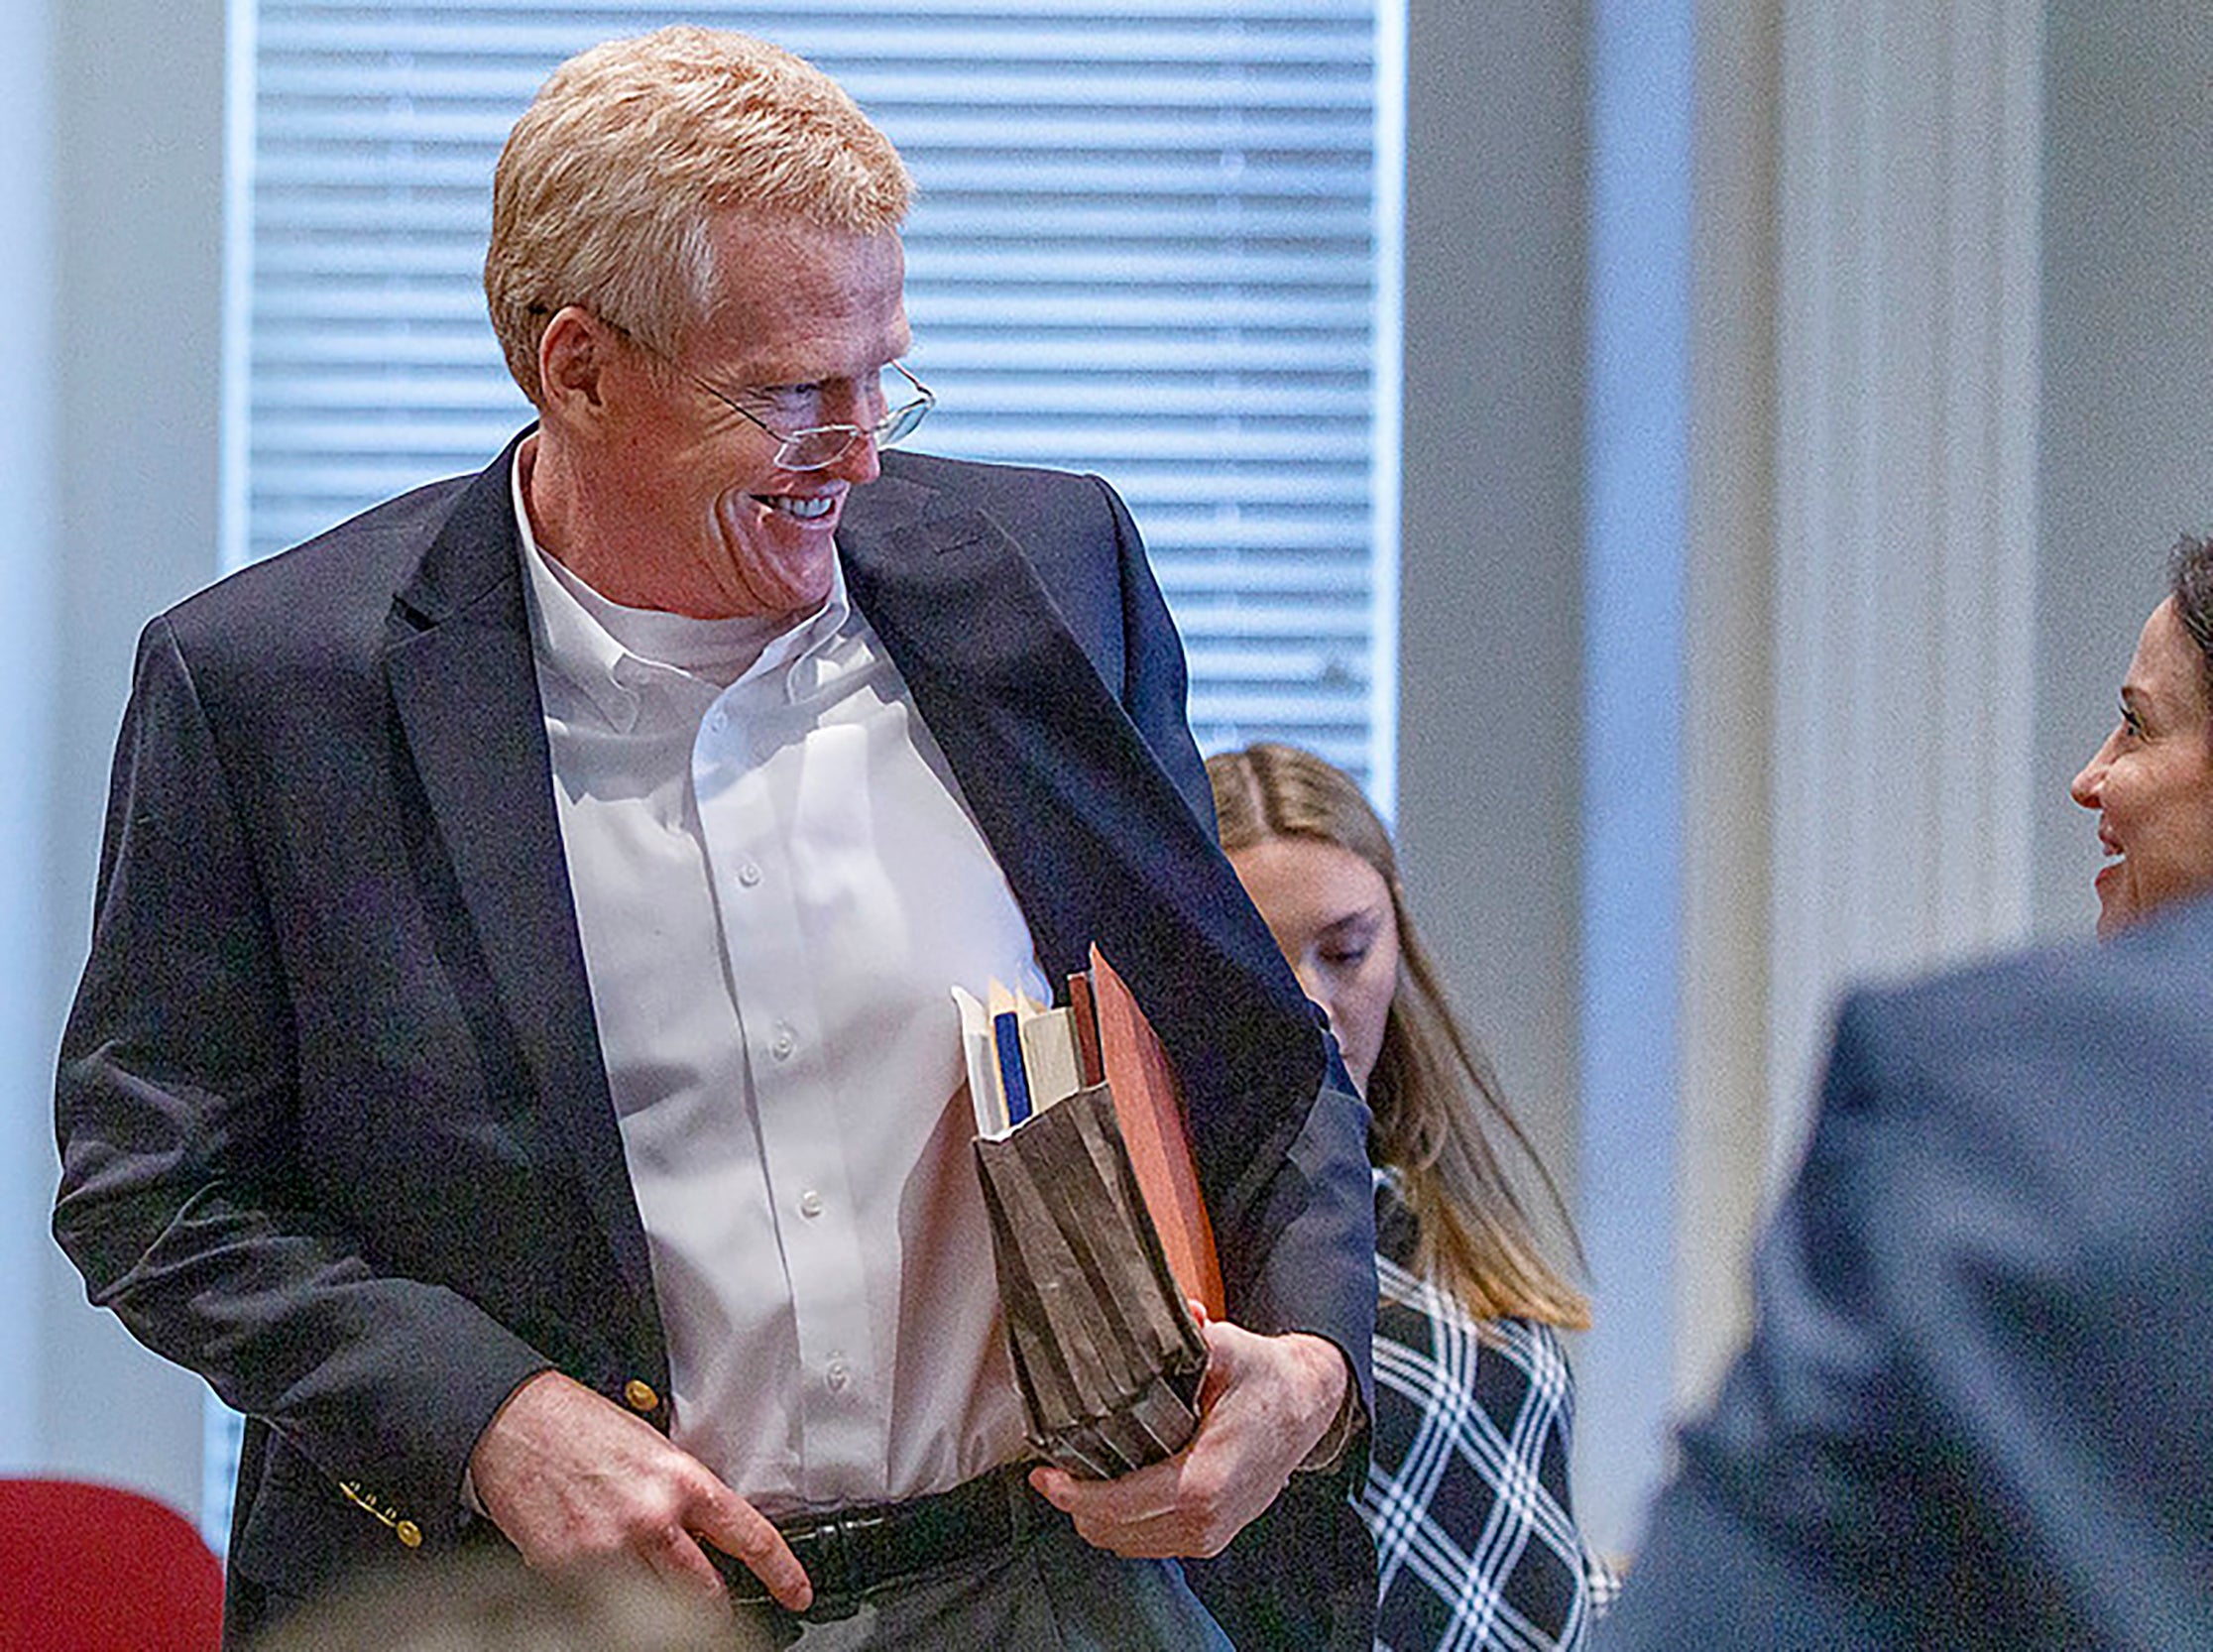 Alex Murdaugh walks into the Colleton County Courthouse for jury selection on 23 January